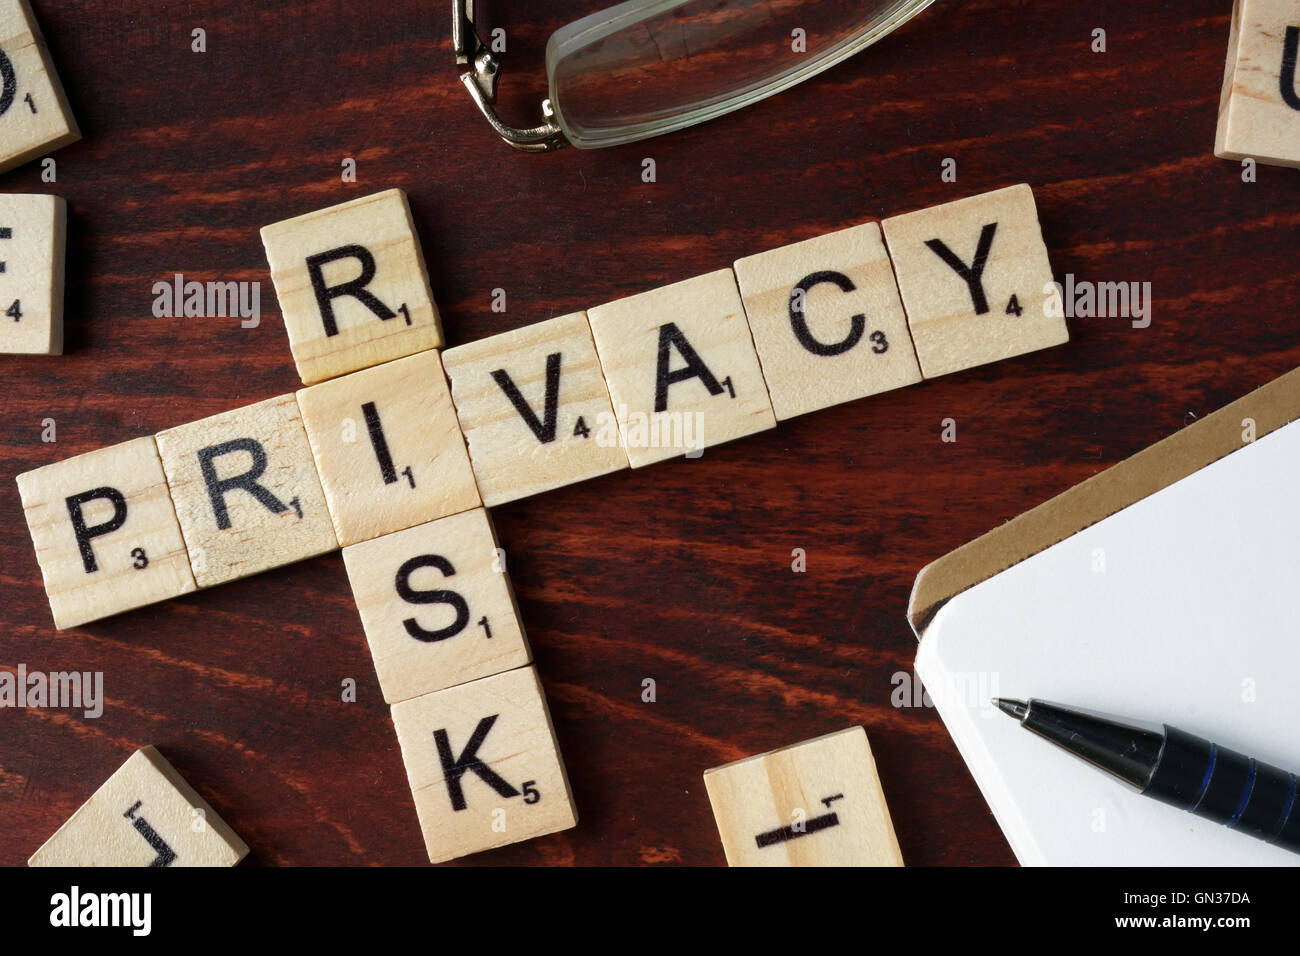 Words Privacy Risk from wooden blocks with letters. Stock Photo